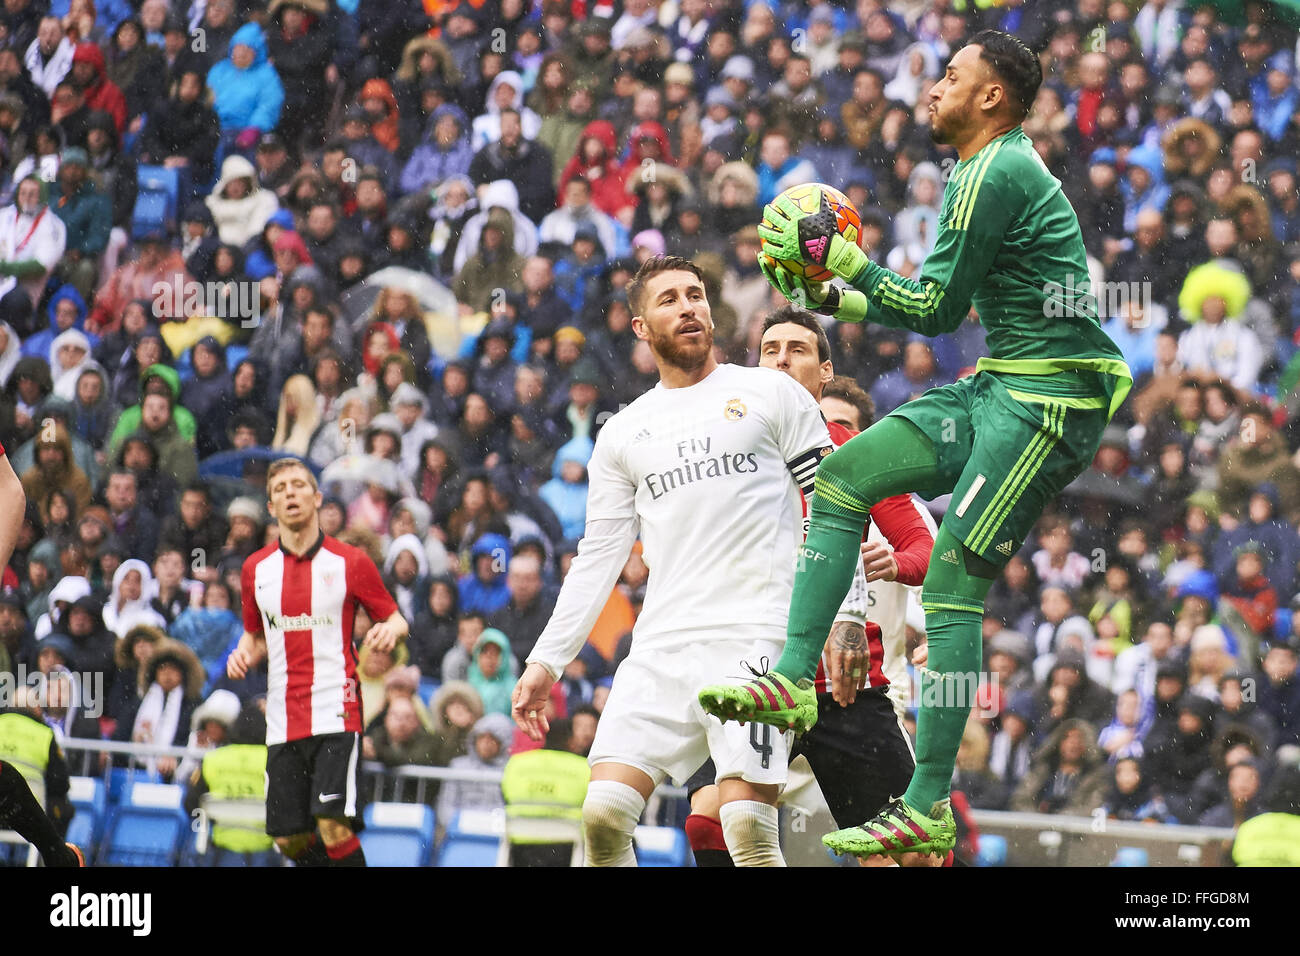 Madrid, Spain. 13th Feb, 2016. Sergio Ramos (defender; Real Madrid), Keylor Navas (goalkeeper; Real Madrid) in action during La Liga match between Real Madrid and Athletic Club Bilbao at Santiago Bernabeu on February 13, 2016 in Madrid Credit:  Jack Abuin/ZUMA Wire/Alamy Live News Stock Photo